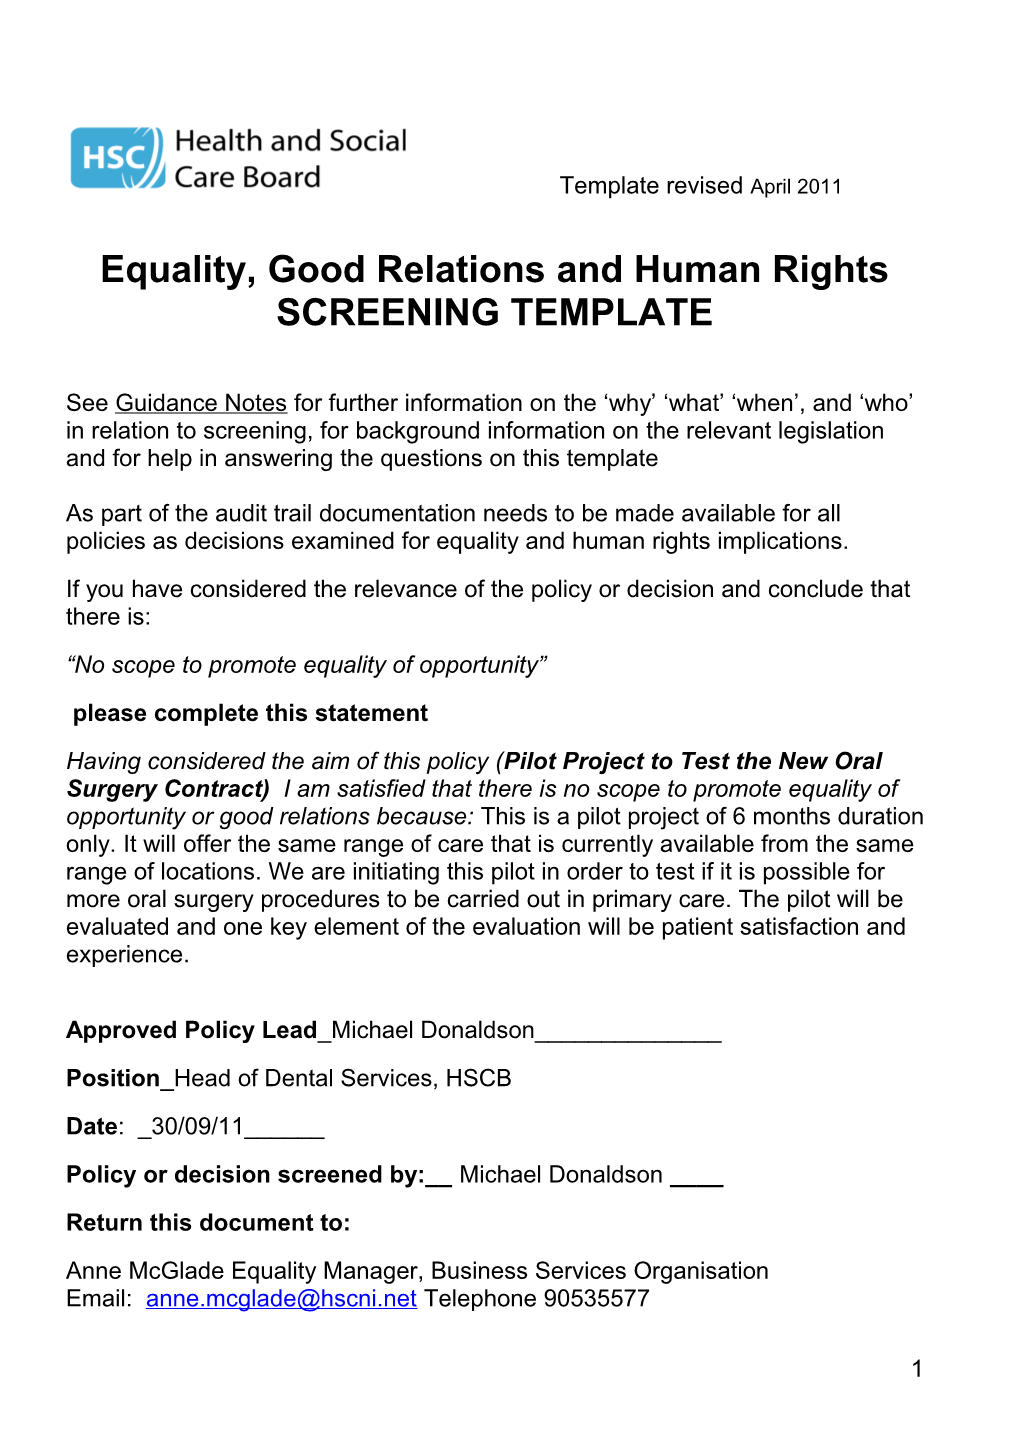 Equality, Good Relations and Human Rights SCREENING TEMPLATE